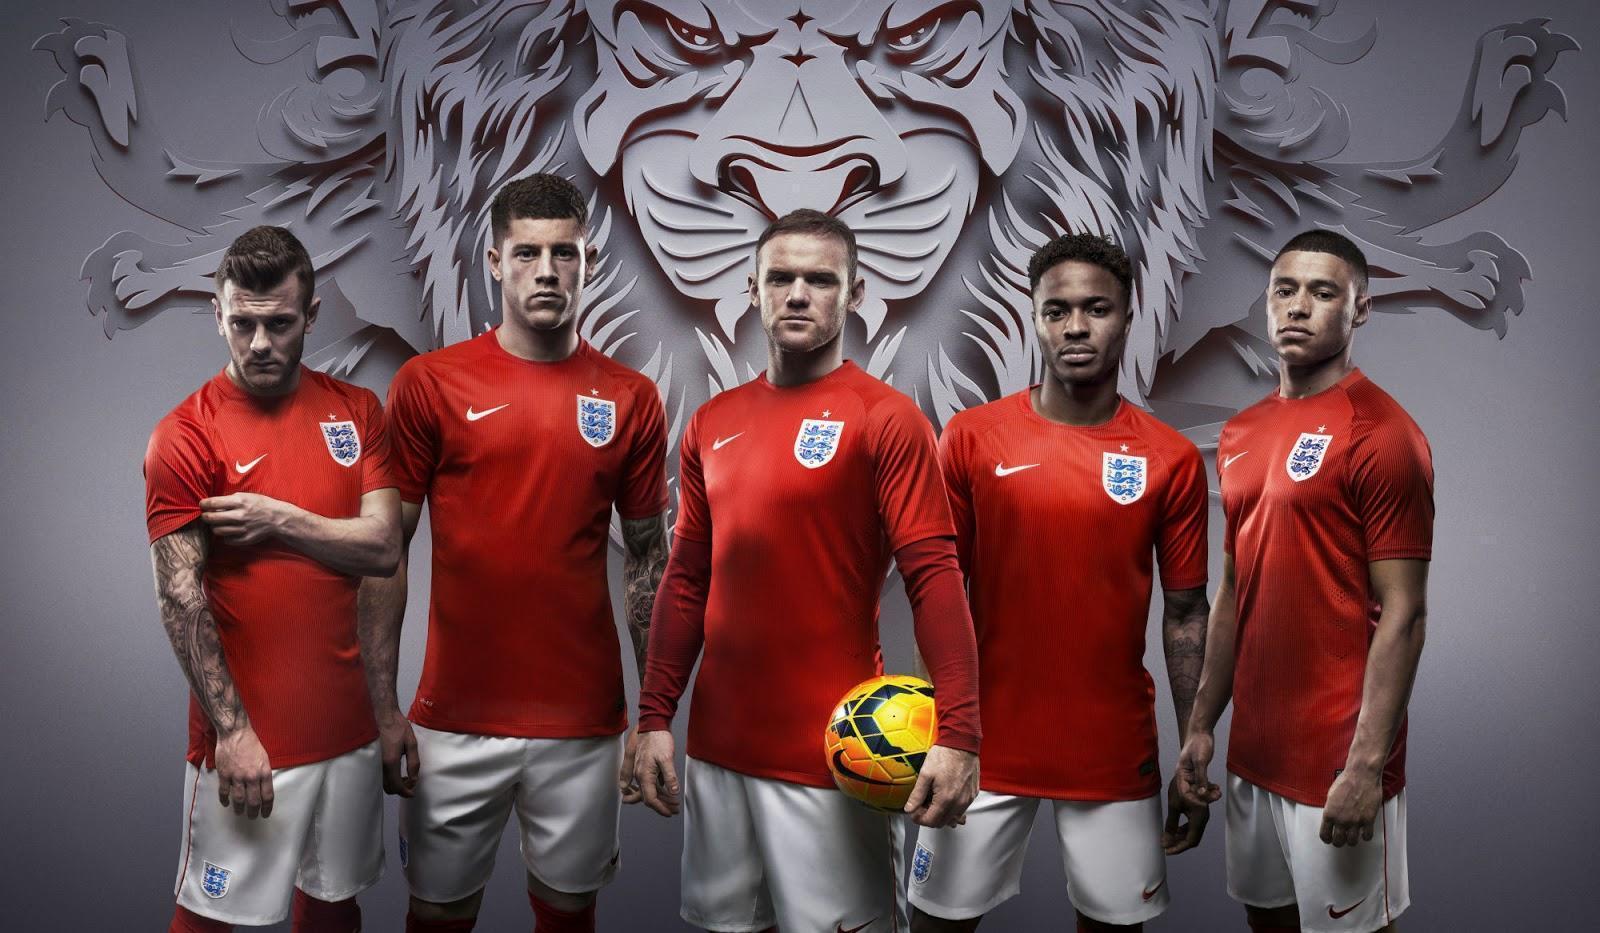 Nike England 2014 World Cup Team Jersey Free Wallpapers Hd Soccer